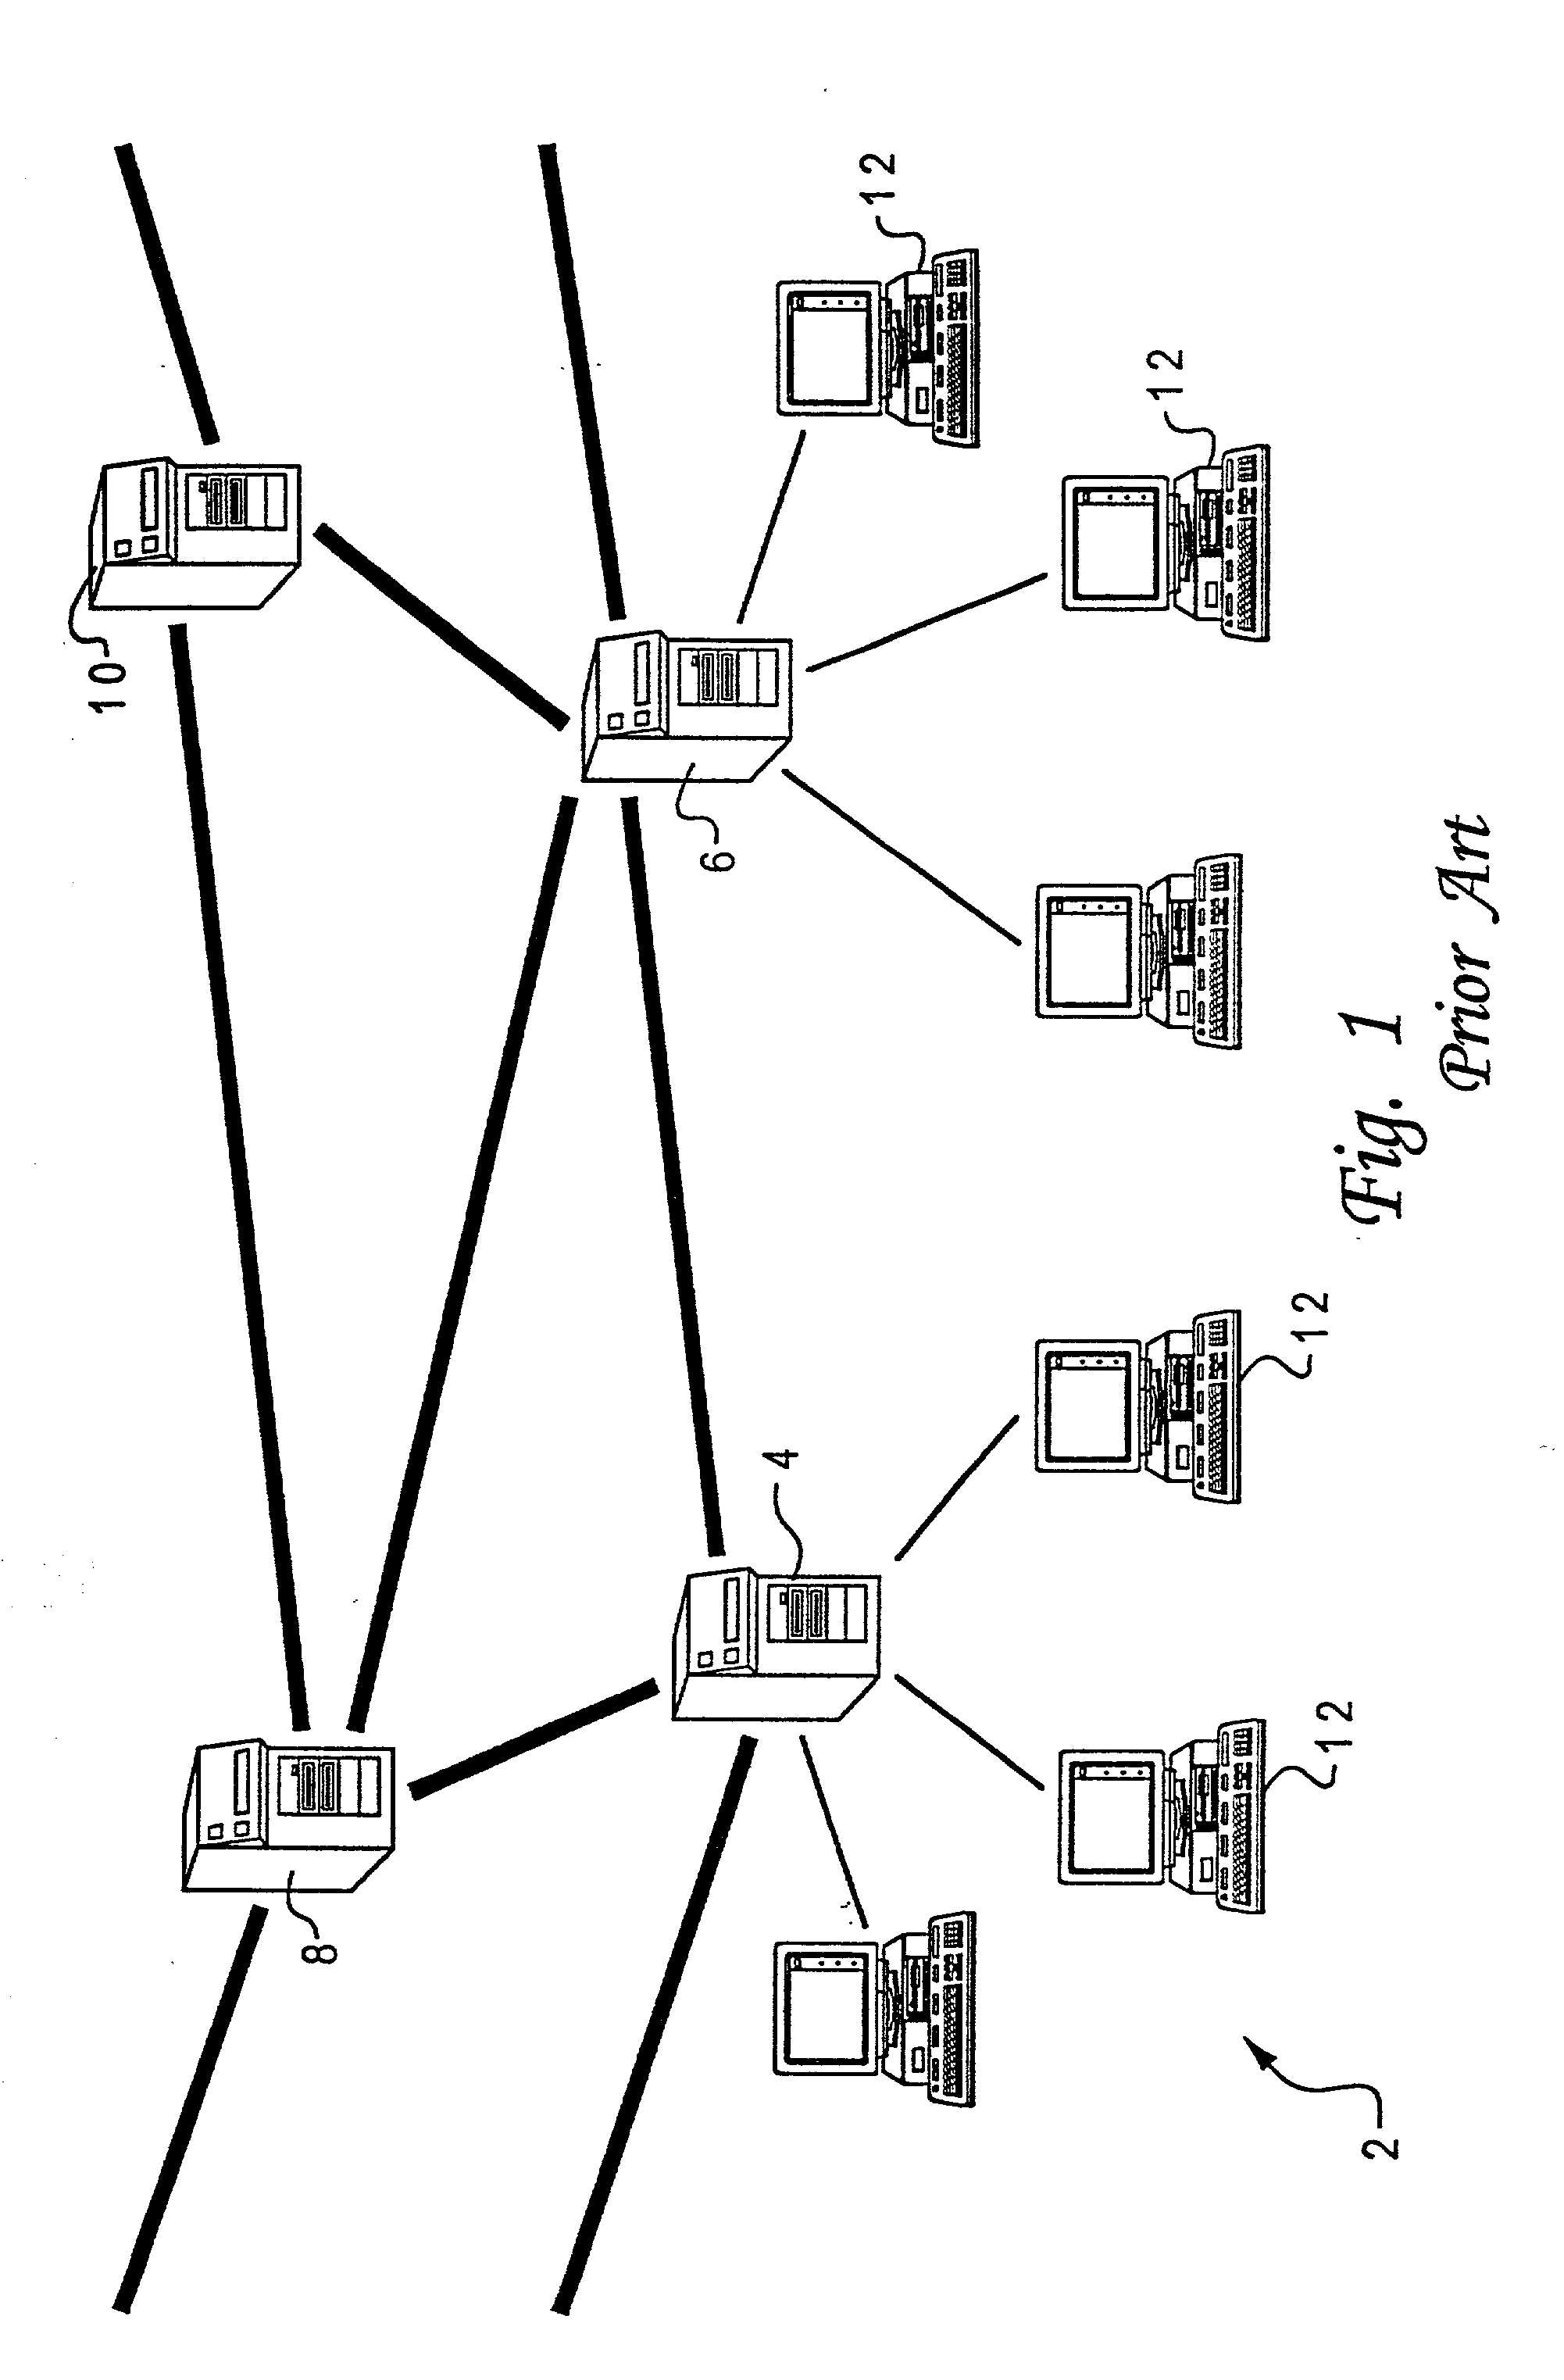 System and method for reliability-based load balancing and dispatching using software rejuvenation